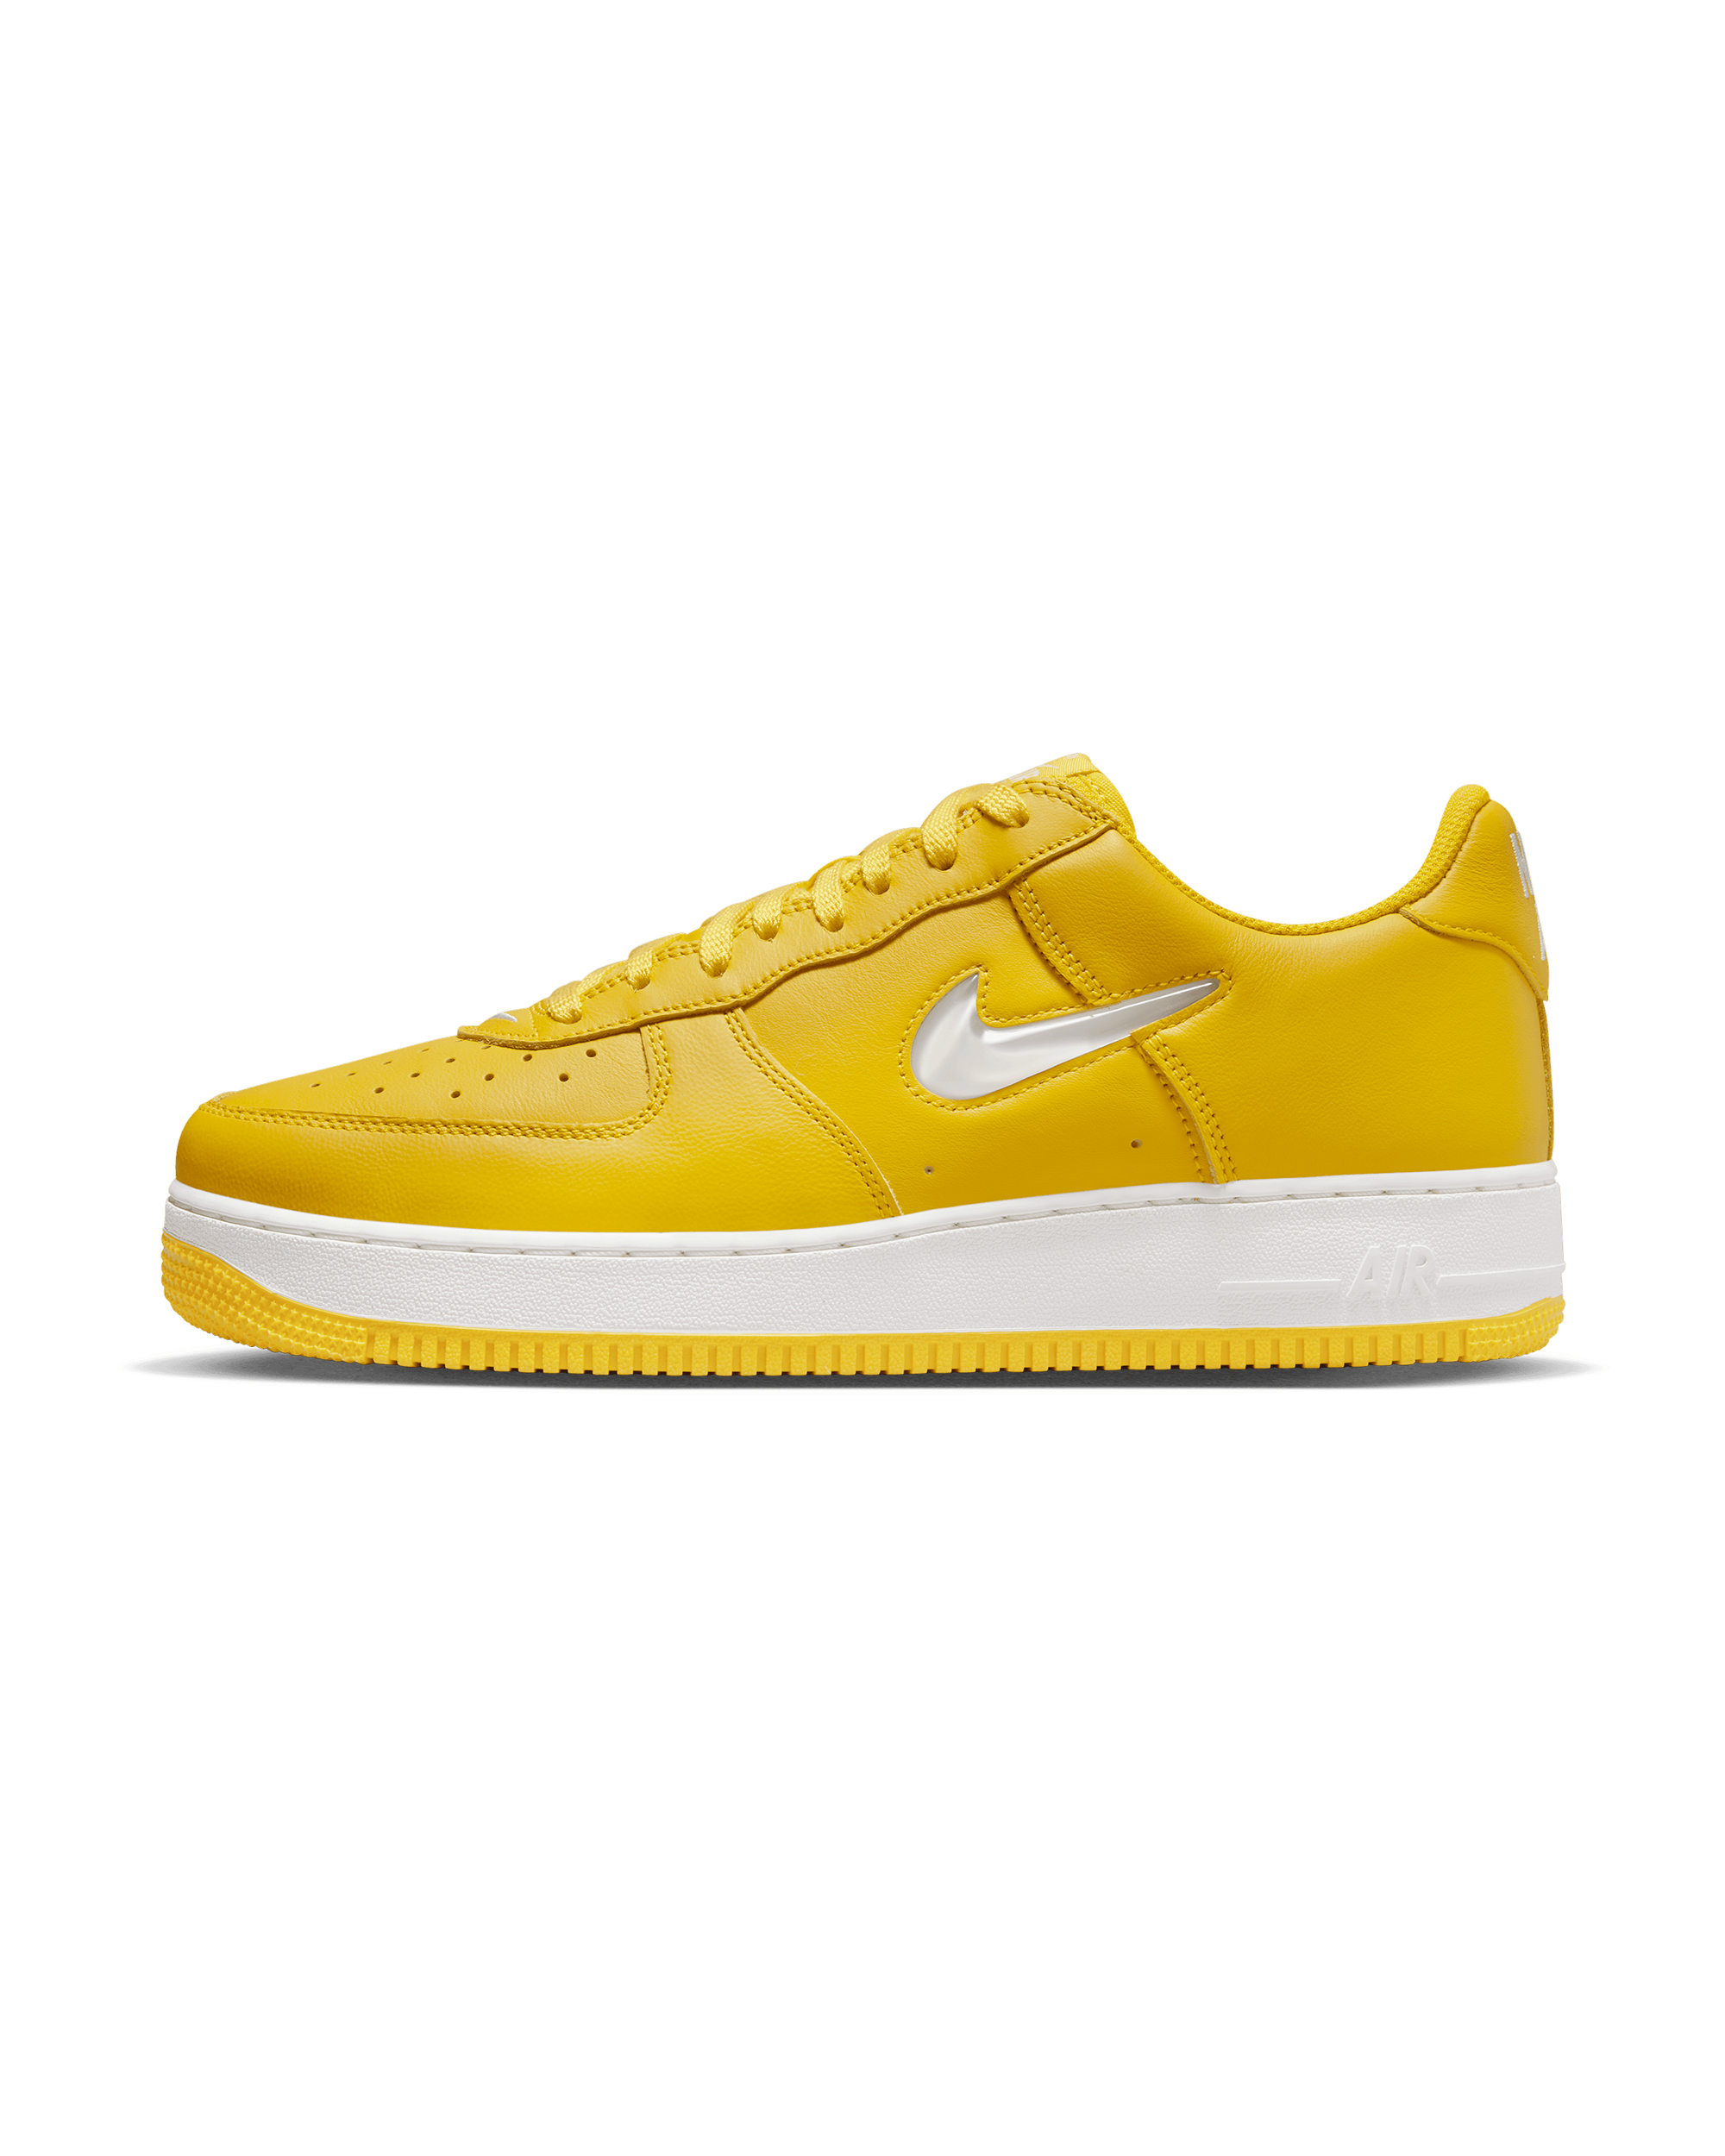 Air Force 1 Low Retro - Speed Yellow / Summit White